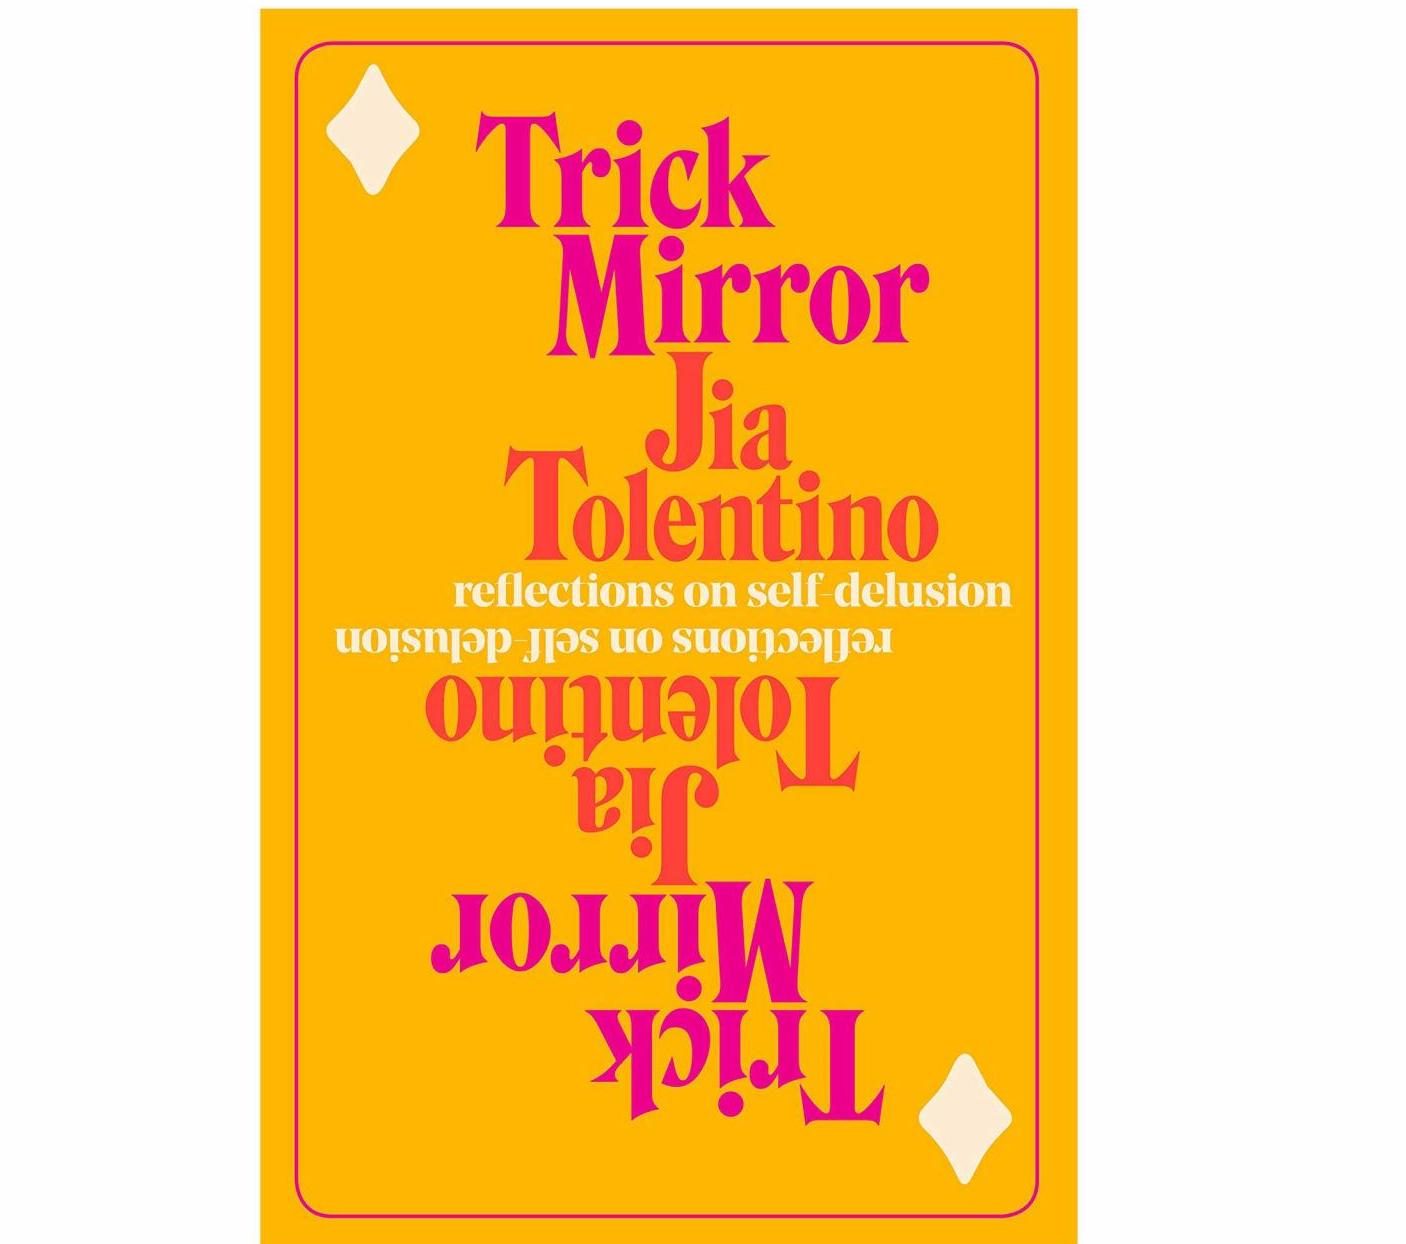 Trick Mirror quickly made it to the New York Times Best Seller list when it was published August 6. Photo from Random House 